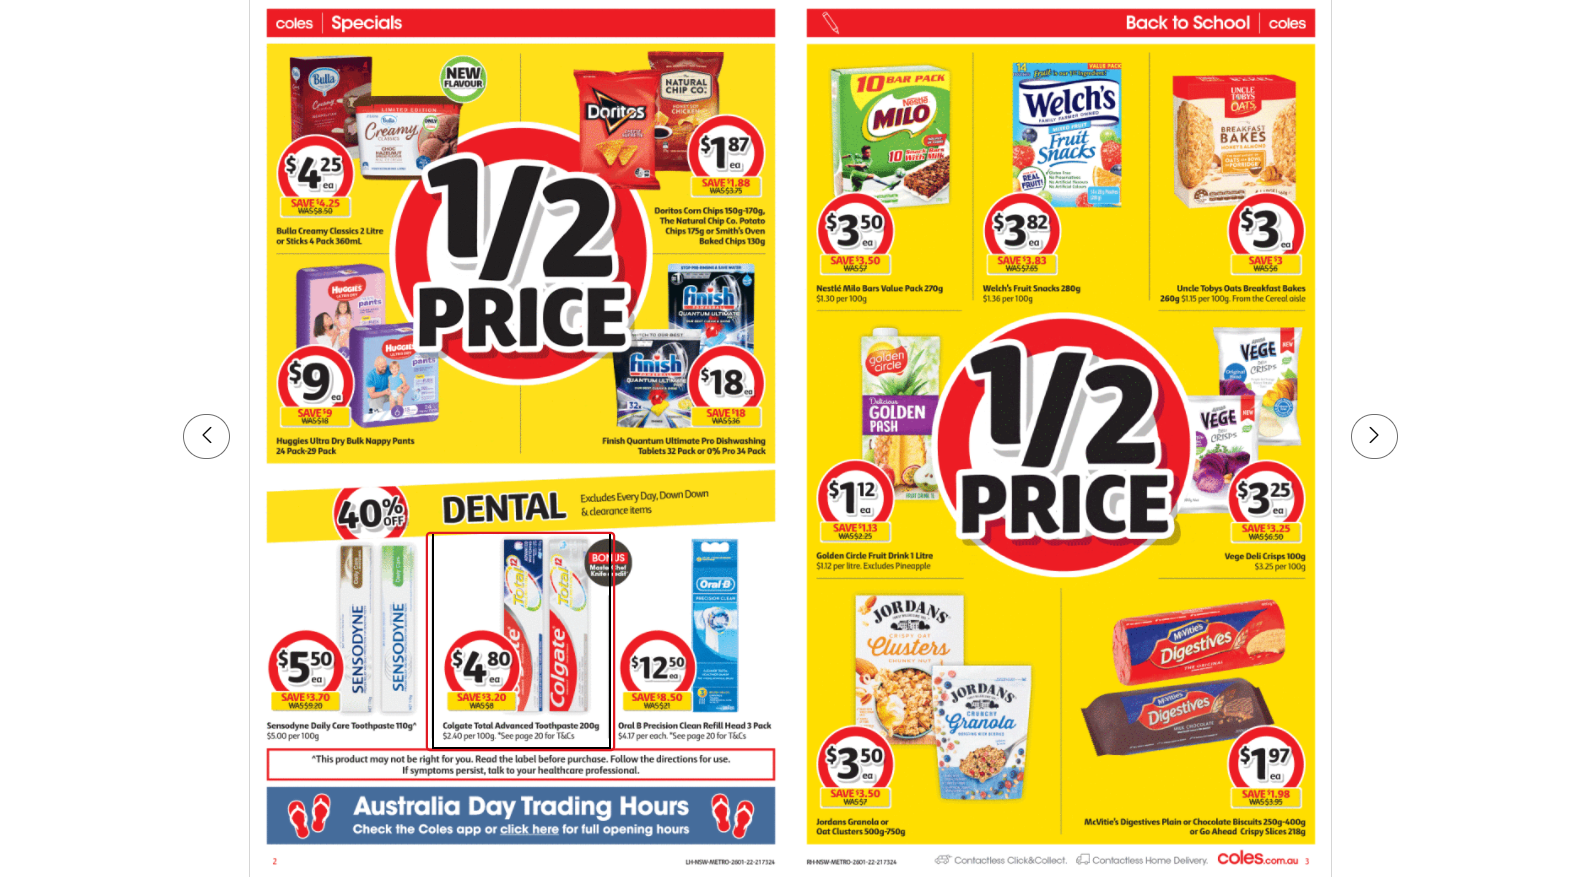 Coles this week's catalogue up to 50% OFF on groceries, beauty & everyday essentials(until 1st Feb)